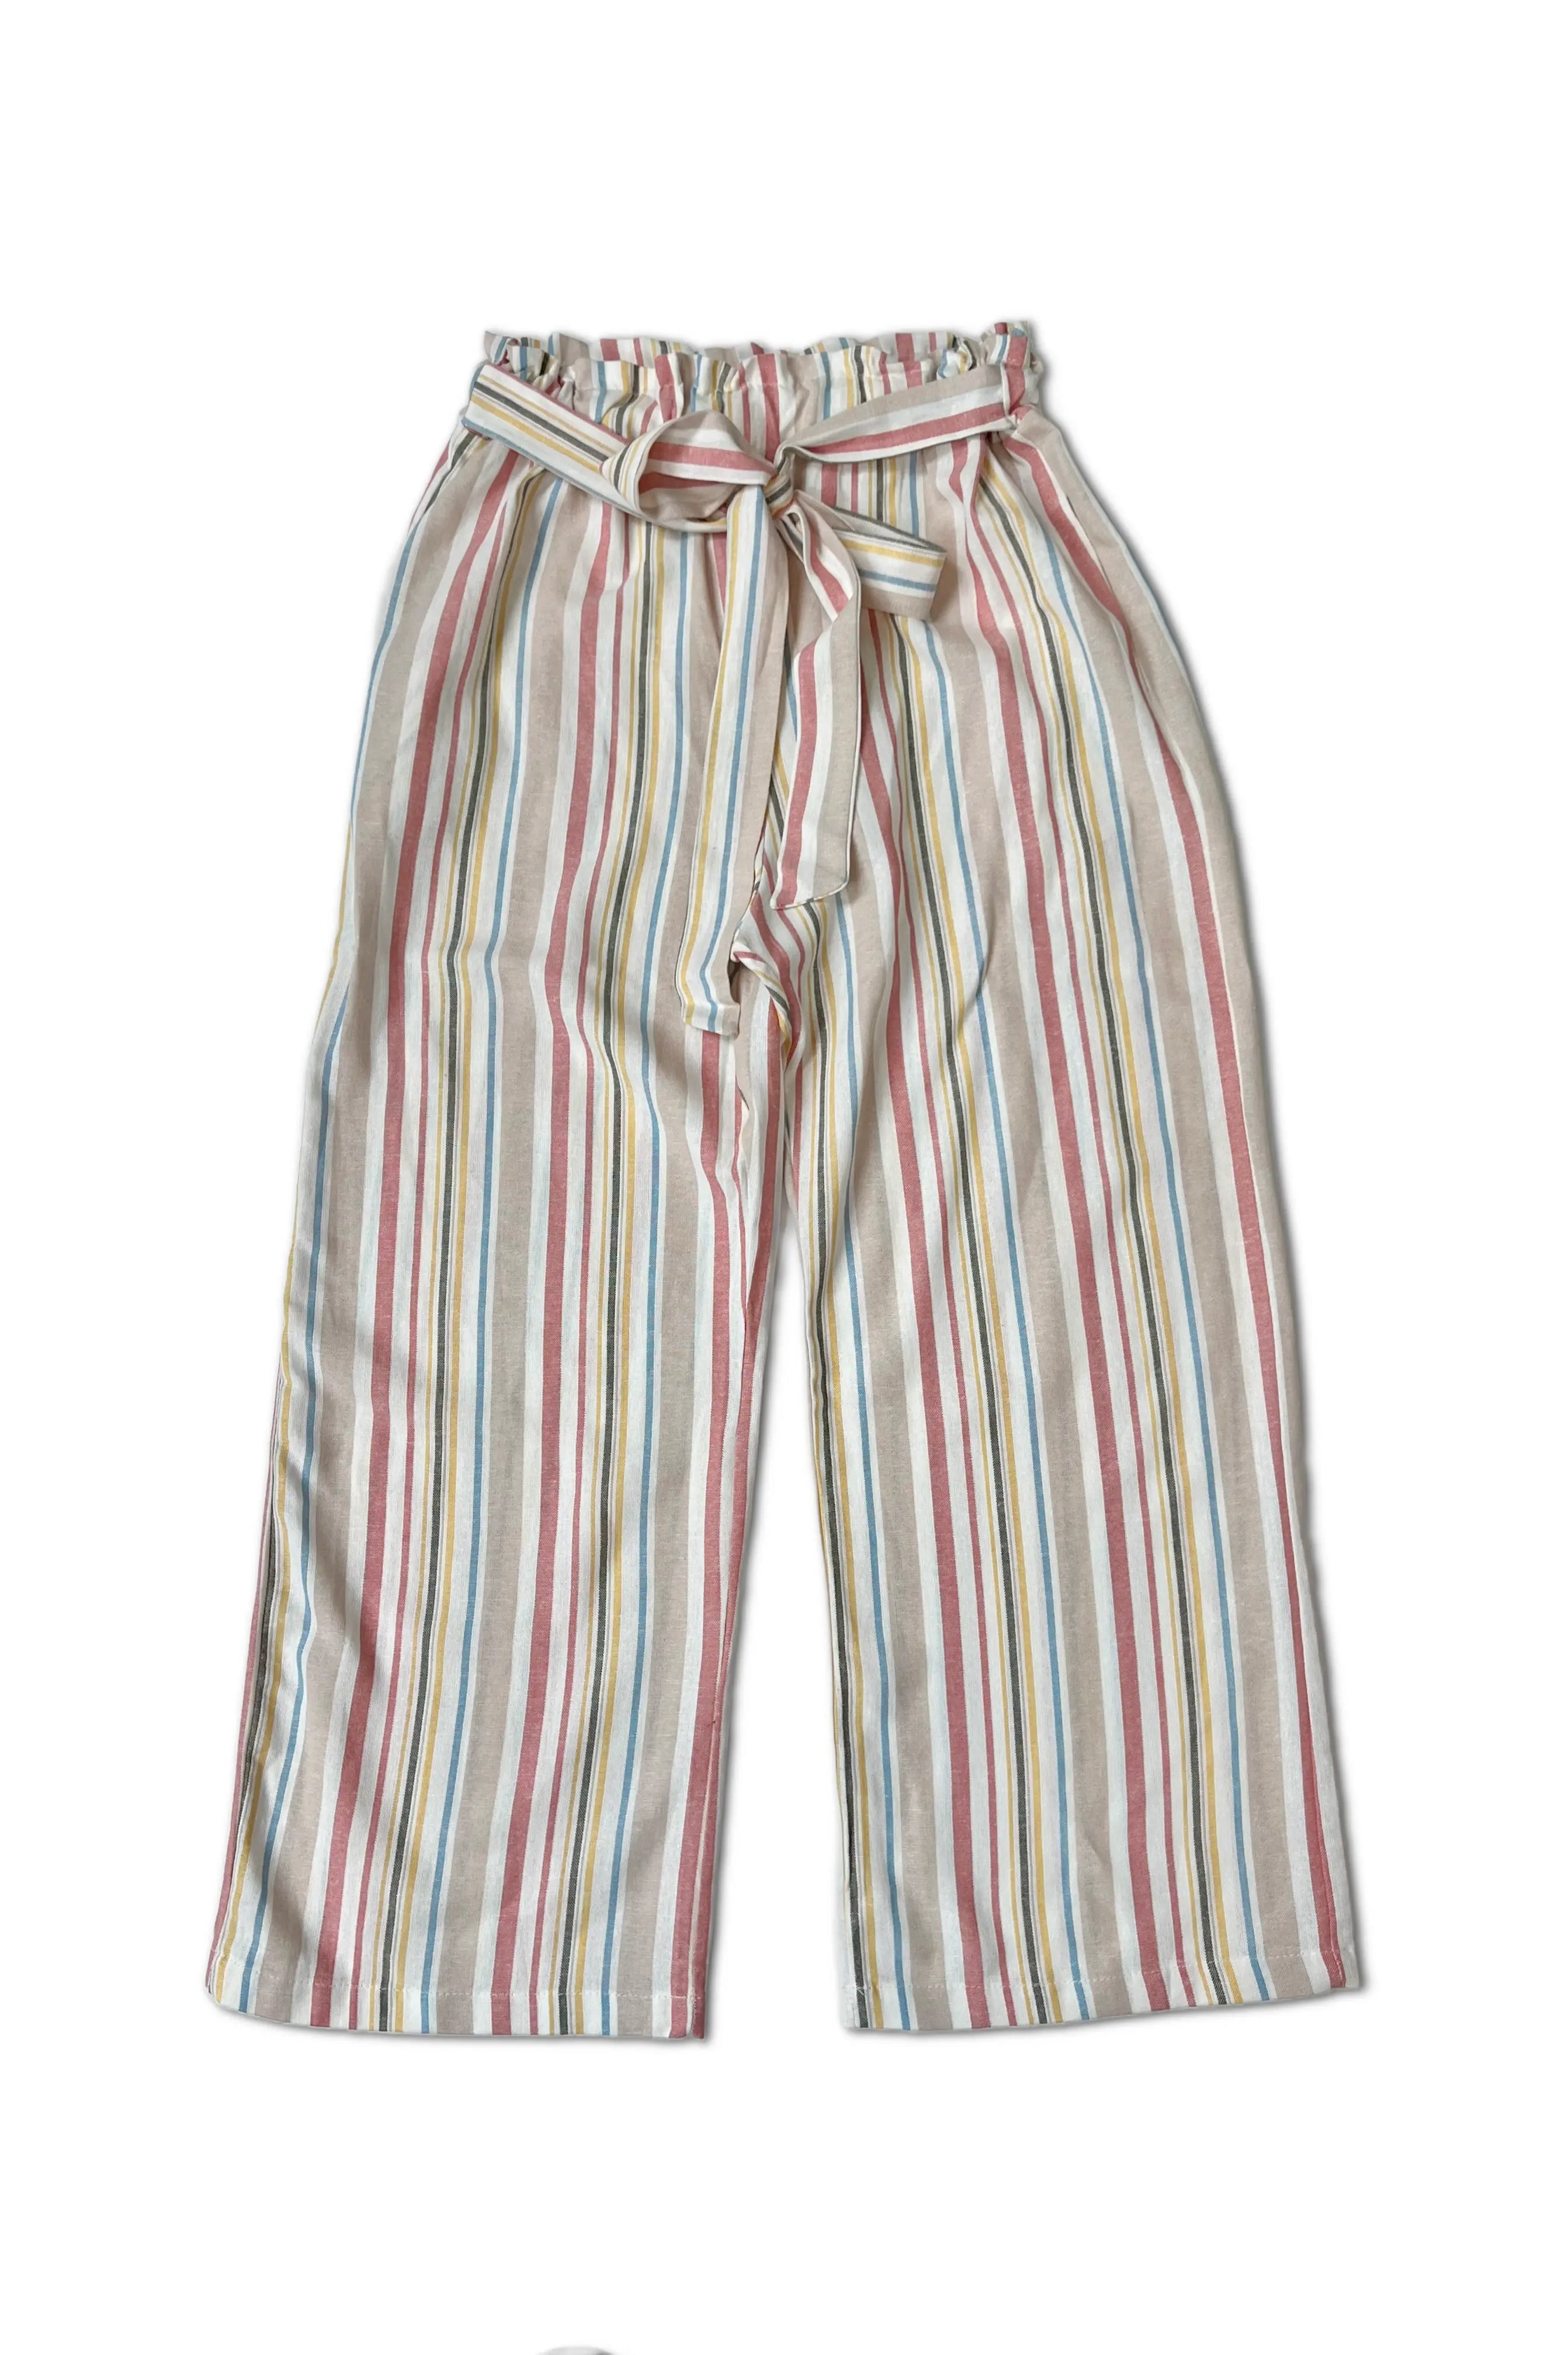 Cool It - Striped Culottes Boutique Simplified